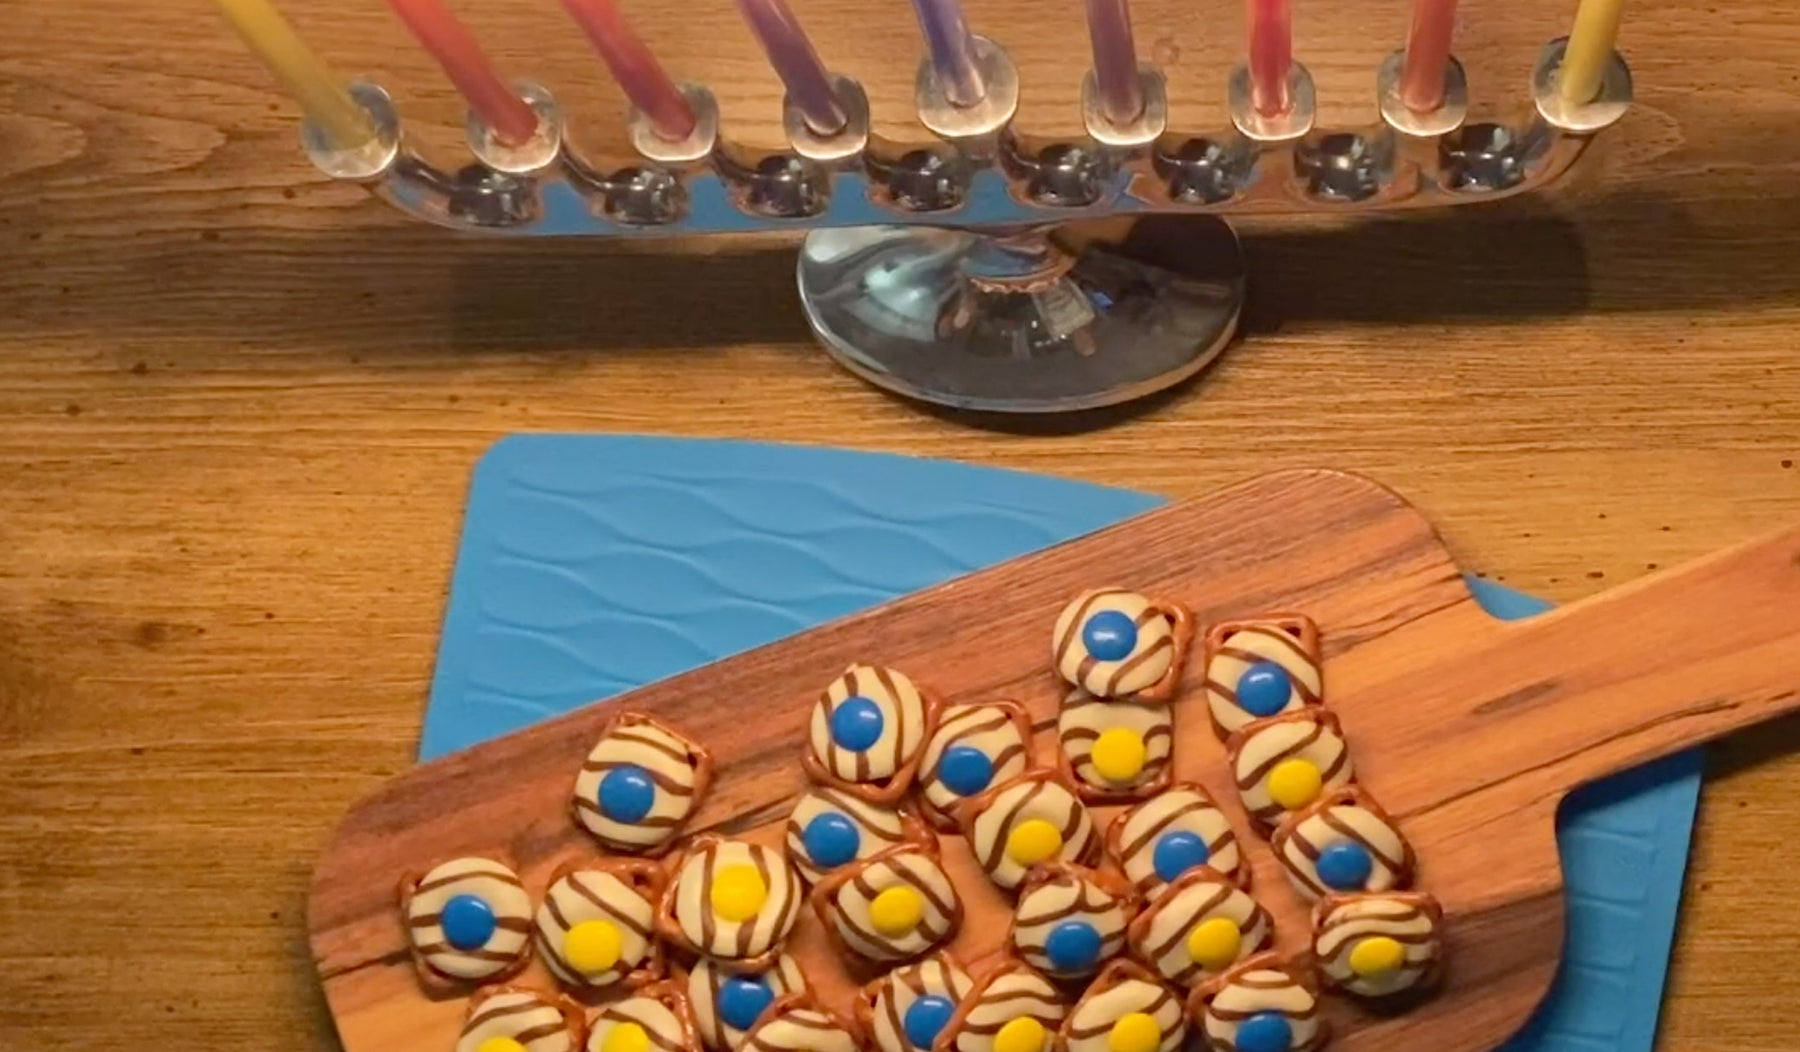 hannukah treats made with pretzels, white chocolate kisses, and M&Ms.